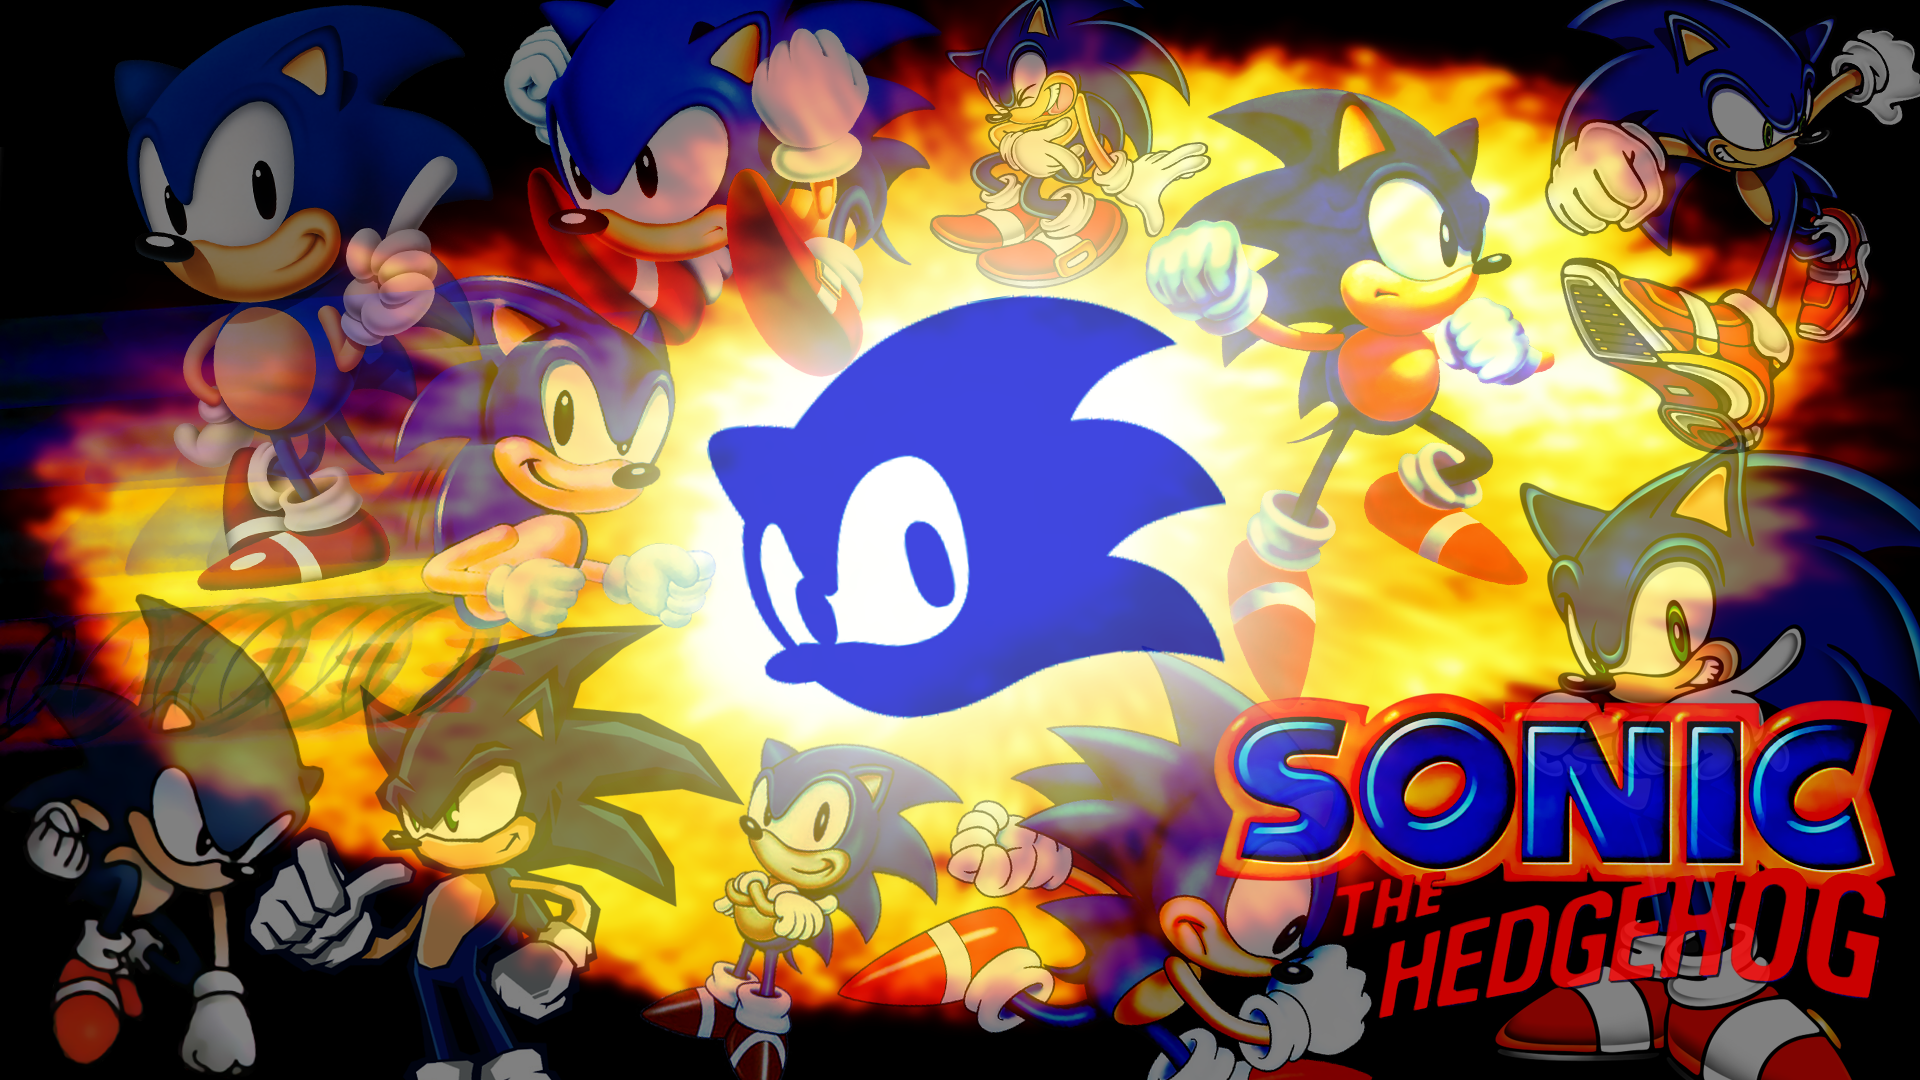 Sonic the Hedgehog HD Wallpaper. Background Imagex1080